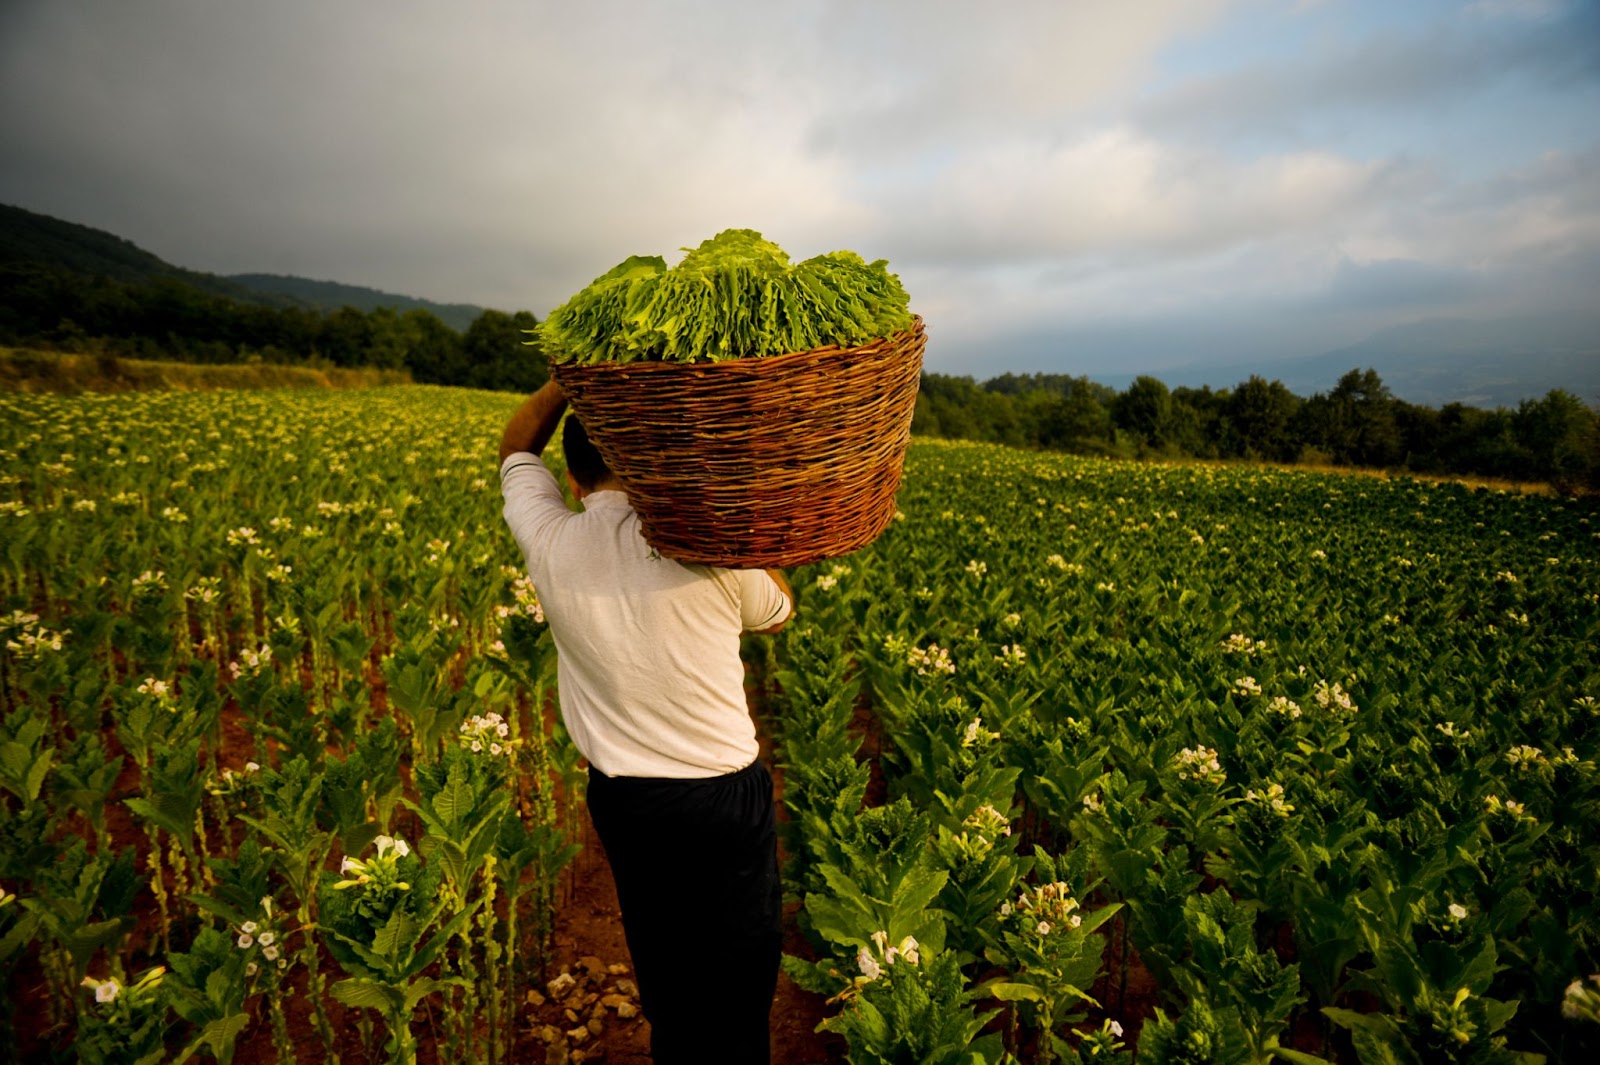 Real farmer carrying a basket full of ruffled tobacco leaves.